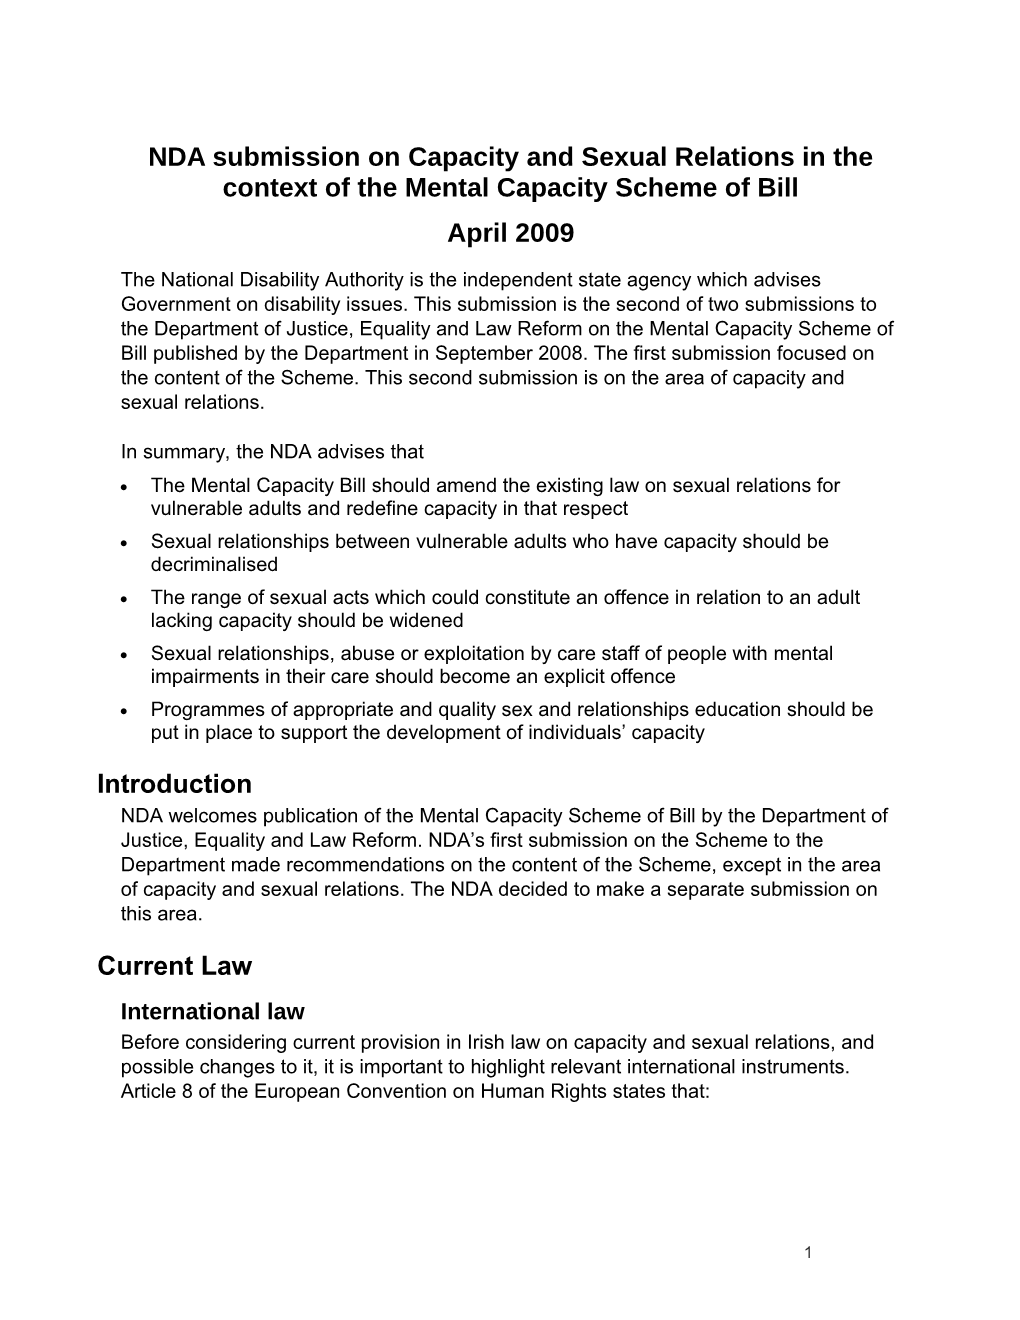 NDA Submission on Capacity and Sexual Relations in the Context of the Mental Capacity